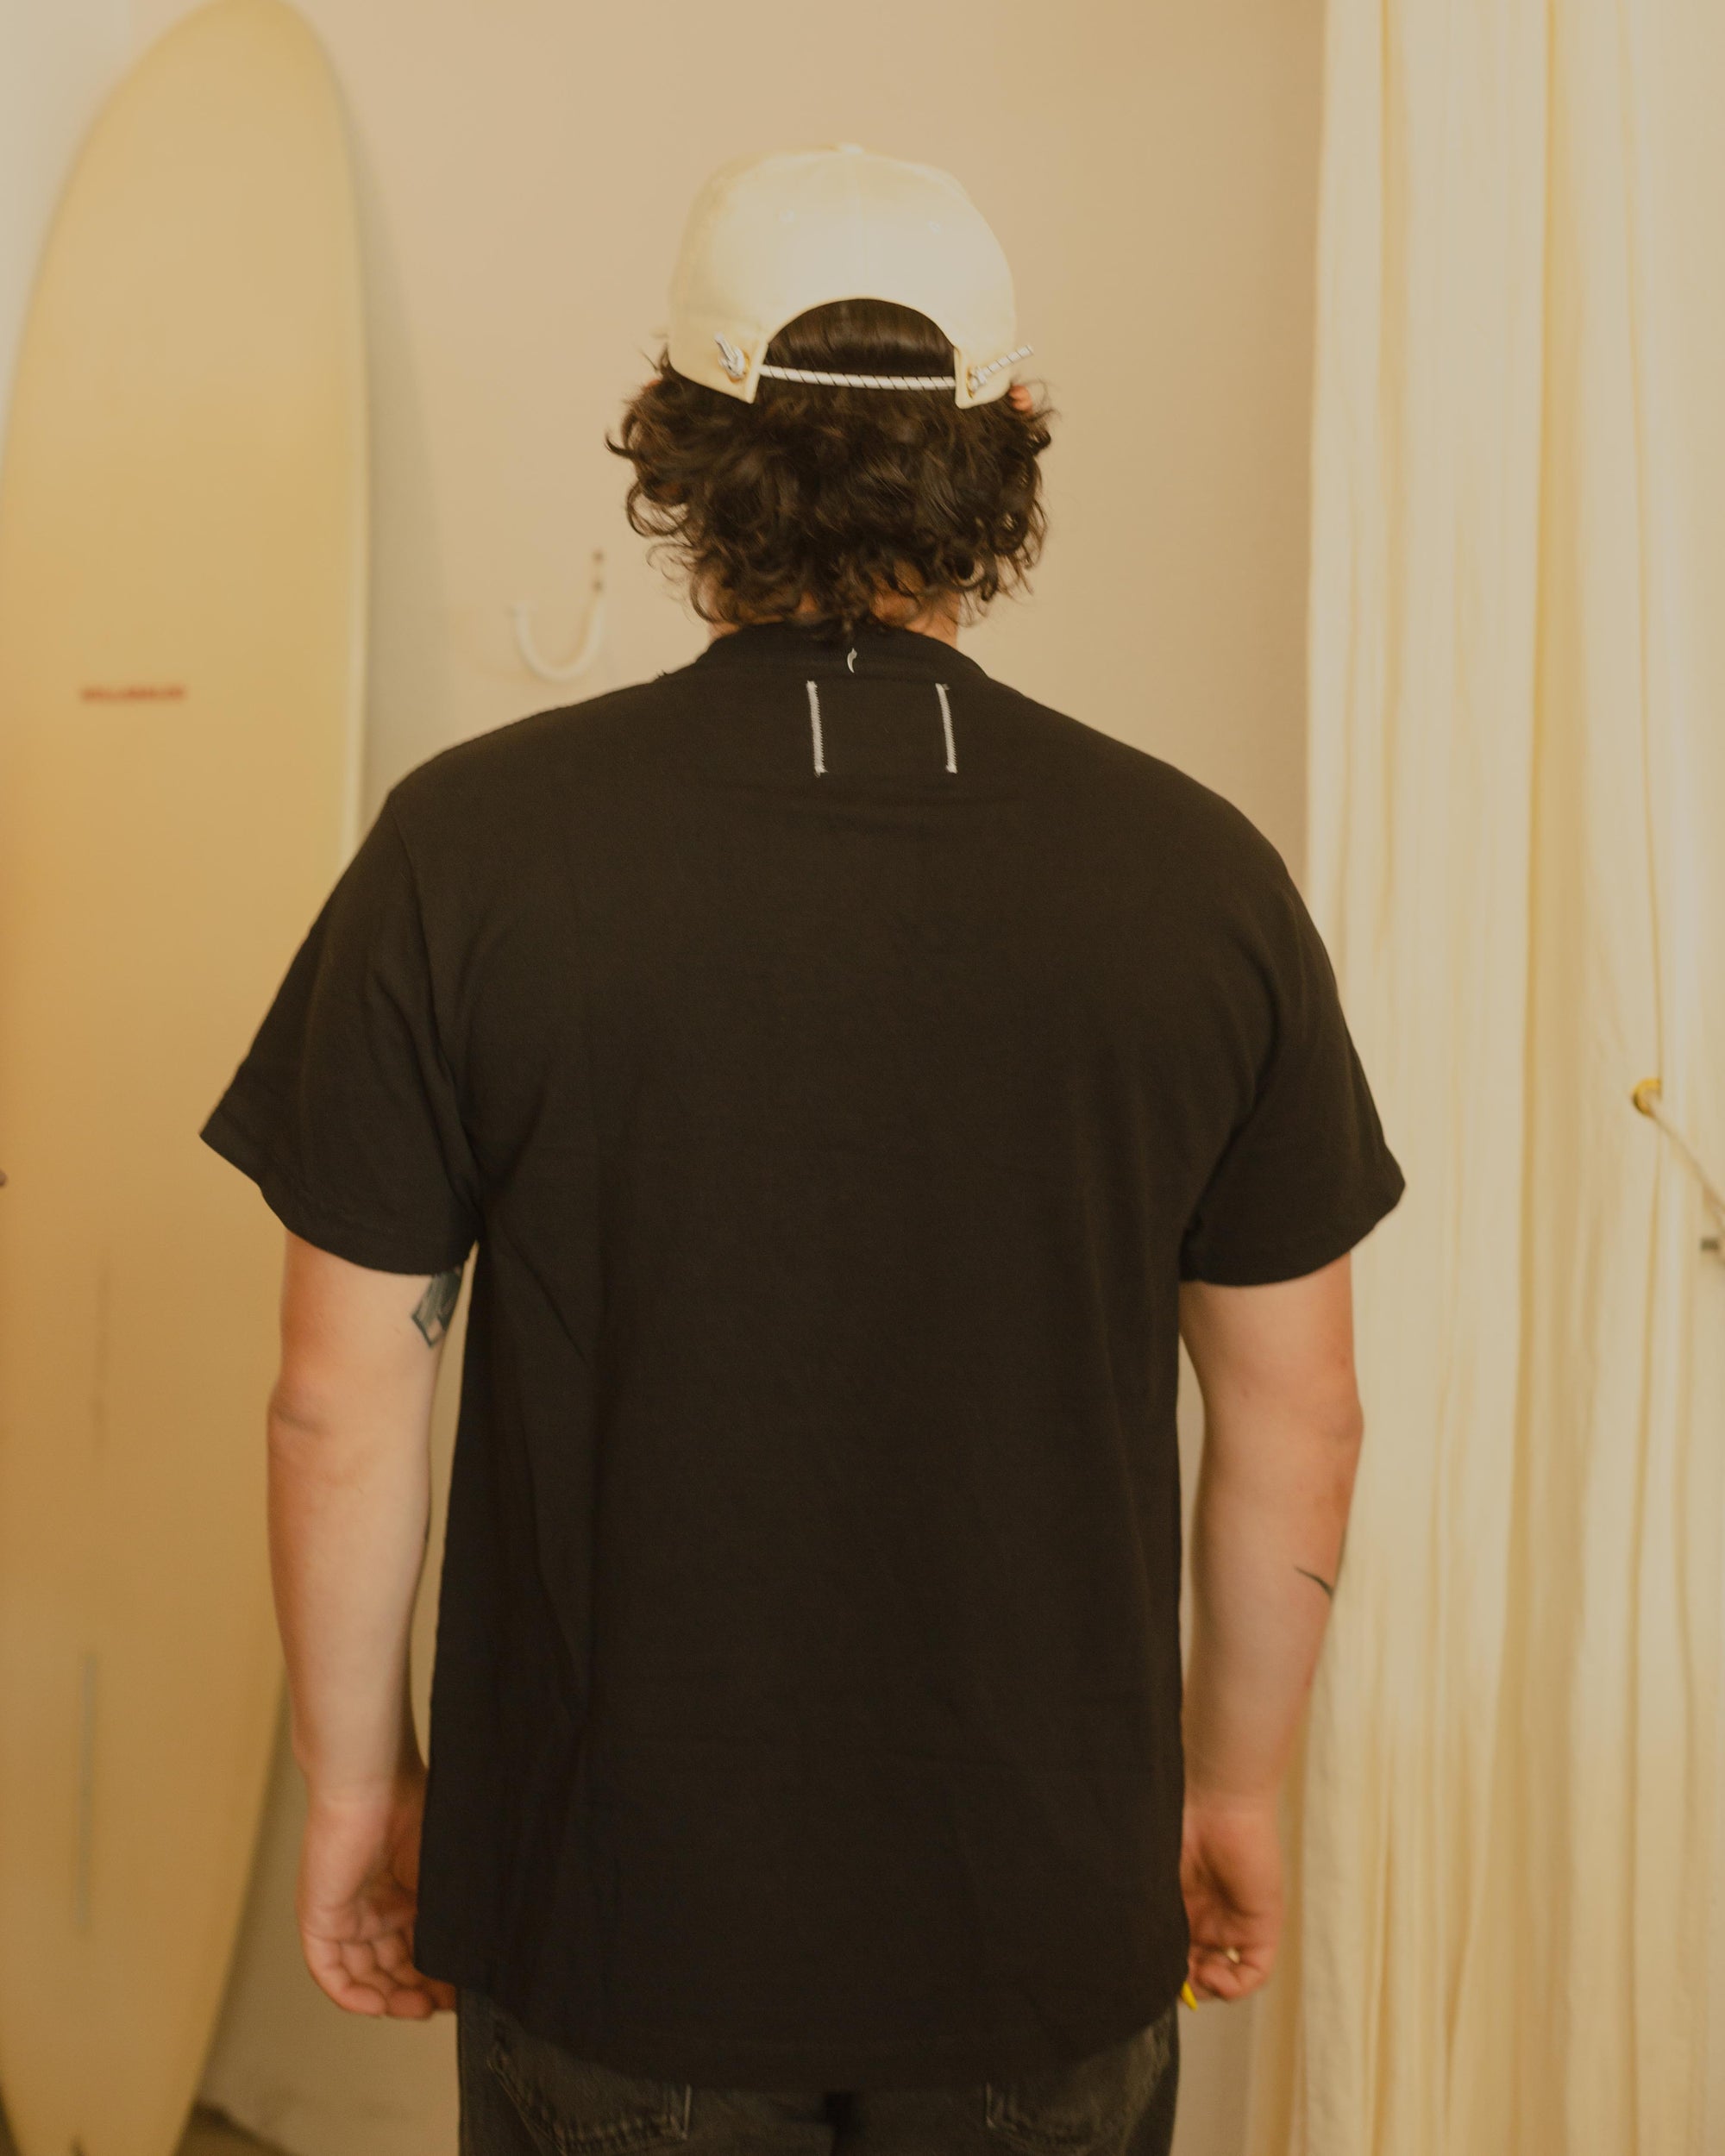 Western Hydrodynamic Research - Starfish Tee back view